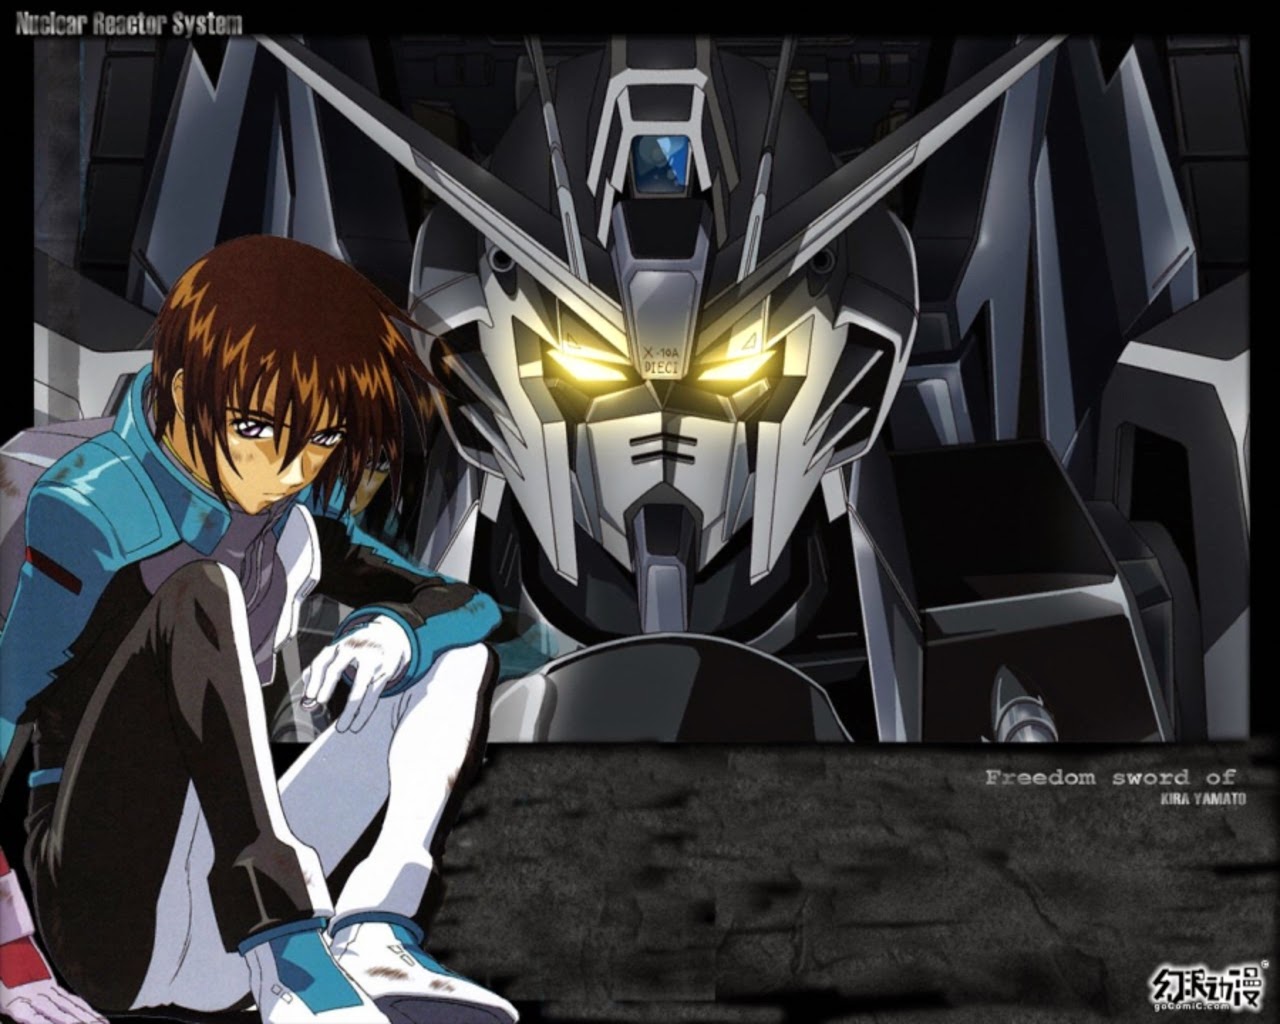 Gundam Strike Freedom For Grand Theft Auto San Andreas Anime 3ds Max Project